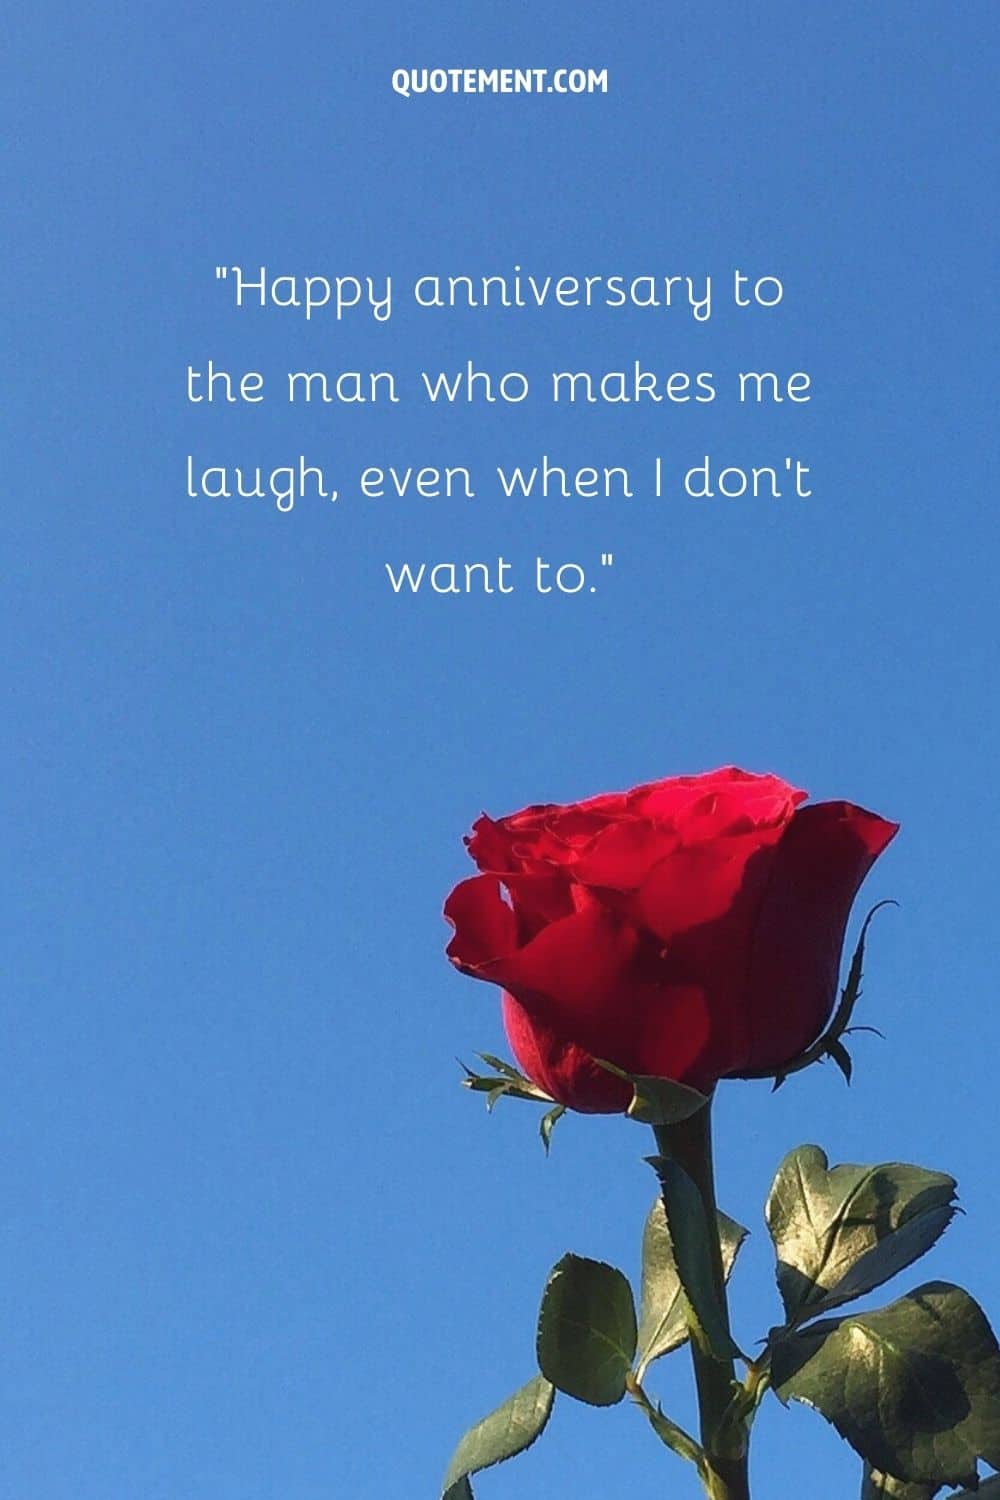 Happy anniversary to the man who makes me laugh, even when I don't want to.